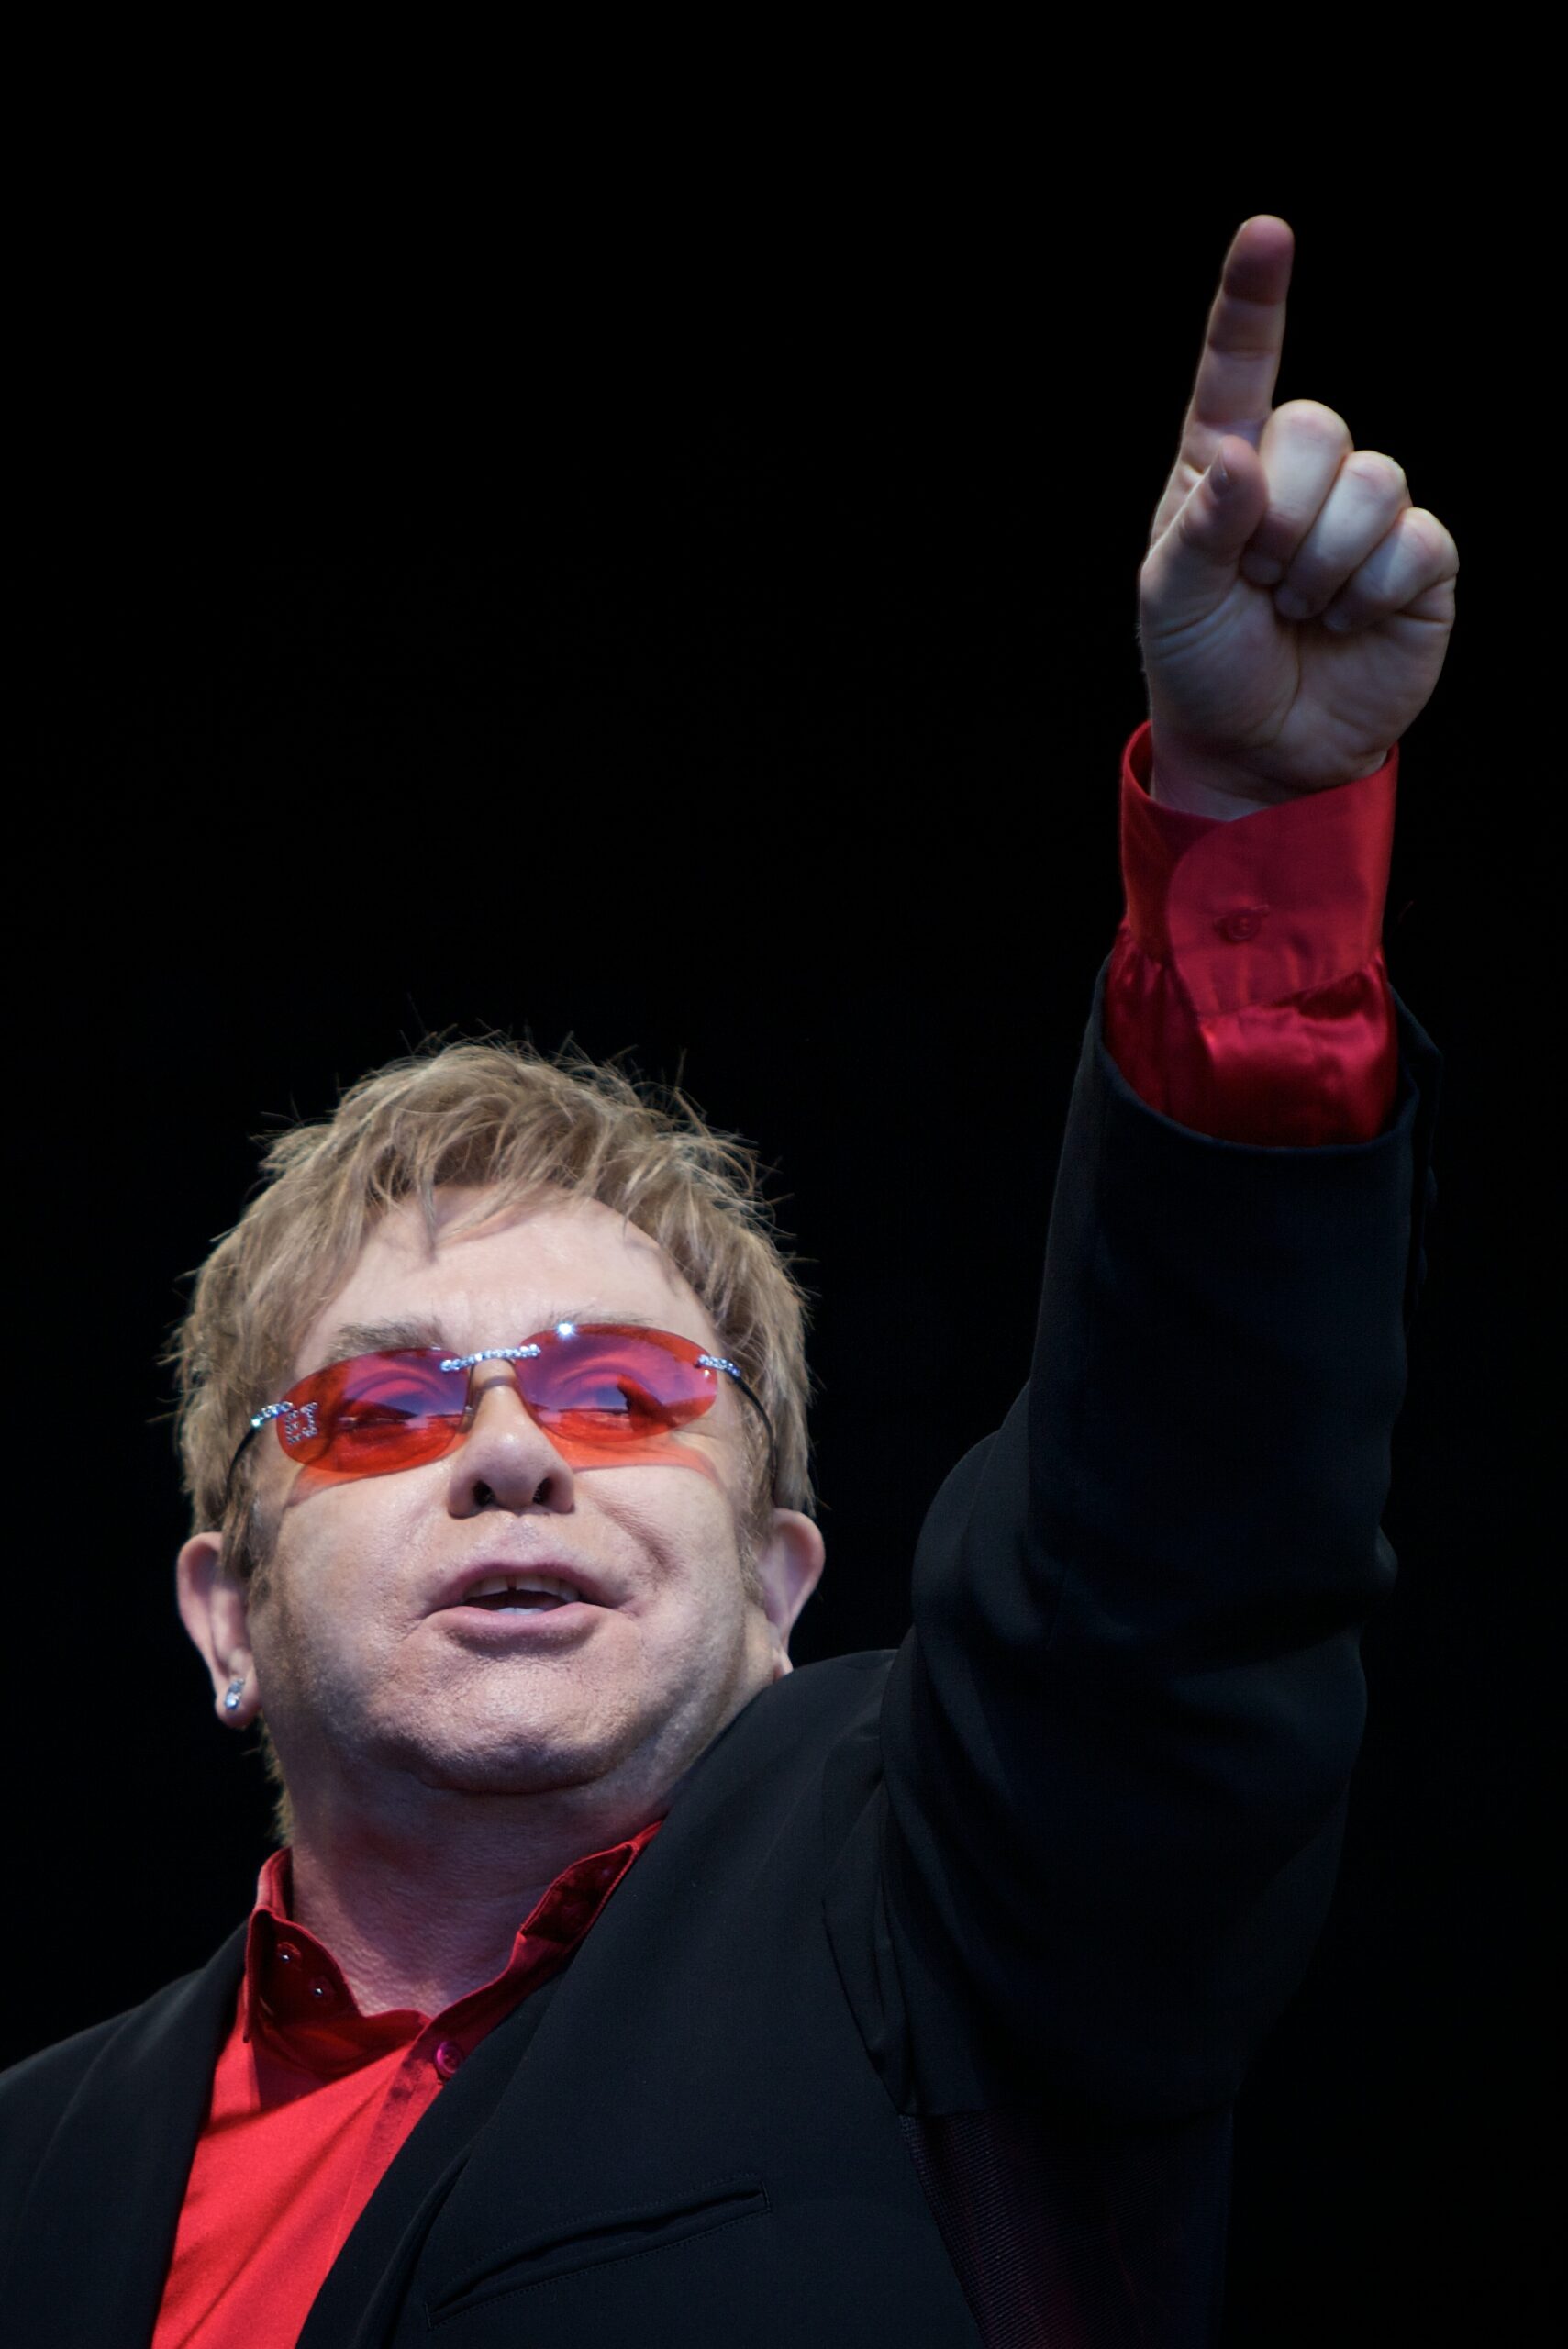 Elton John has had a huge humanitarian impact through philanthropy, which we think more than makes up for that time he completely botched 'I'm Still Standing.'